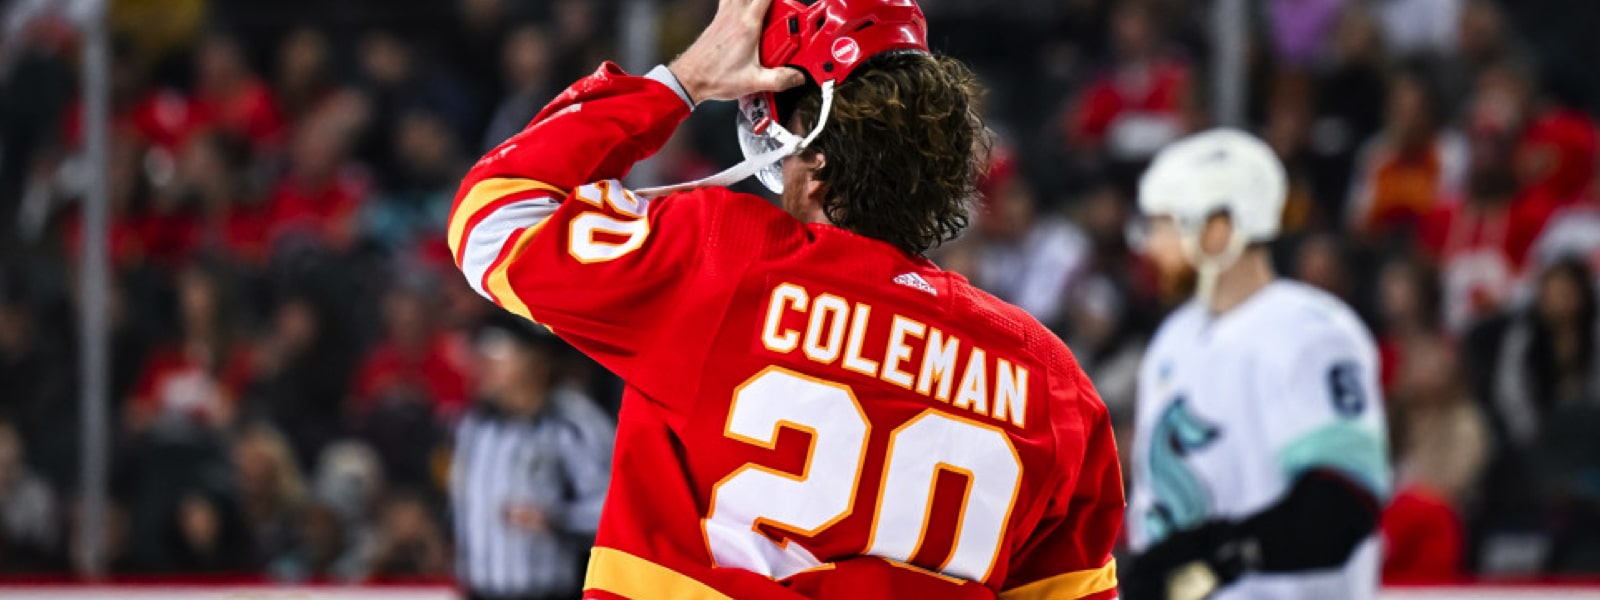 Flames Unfiltered – Episode 202 – Flames Makin and Missin the Grade